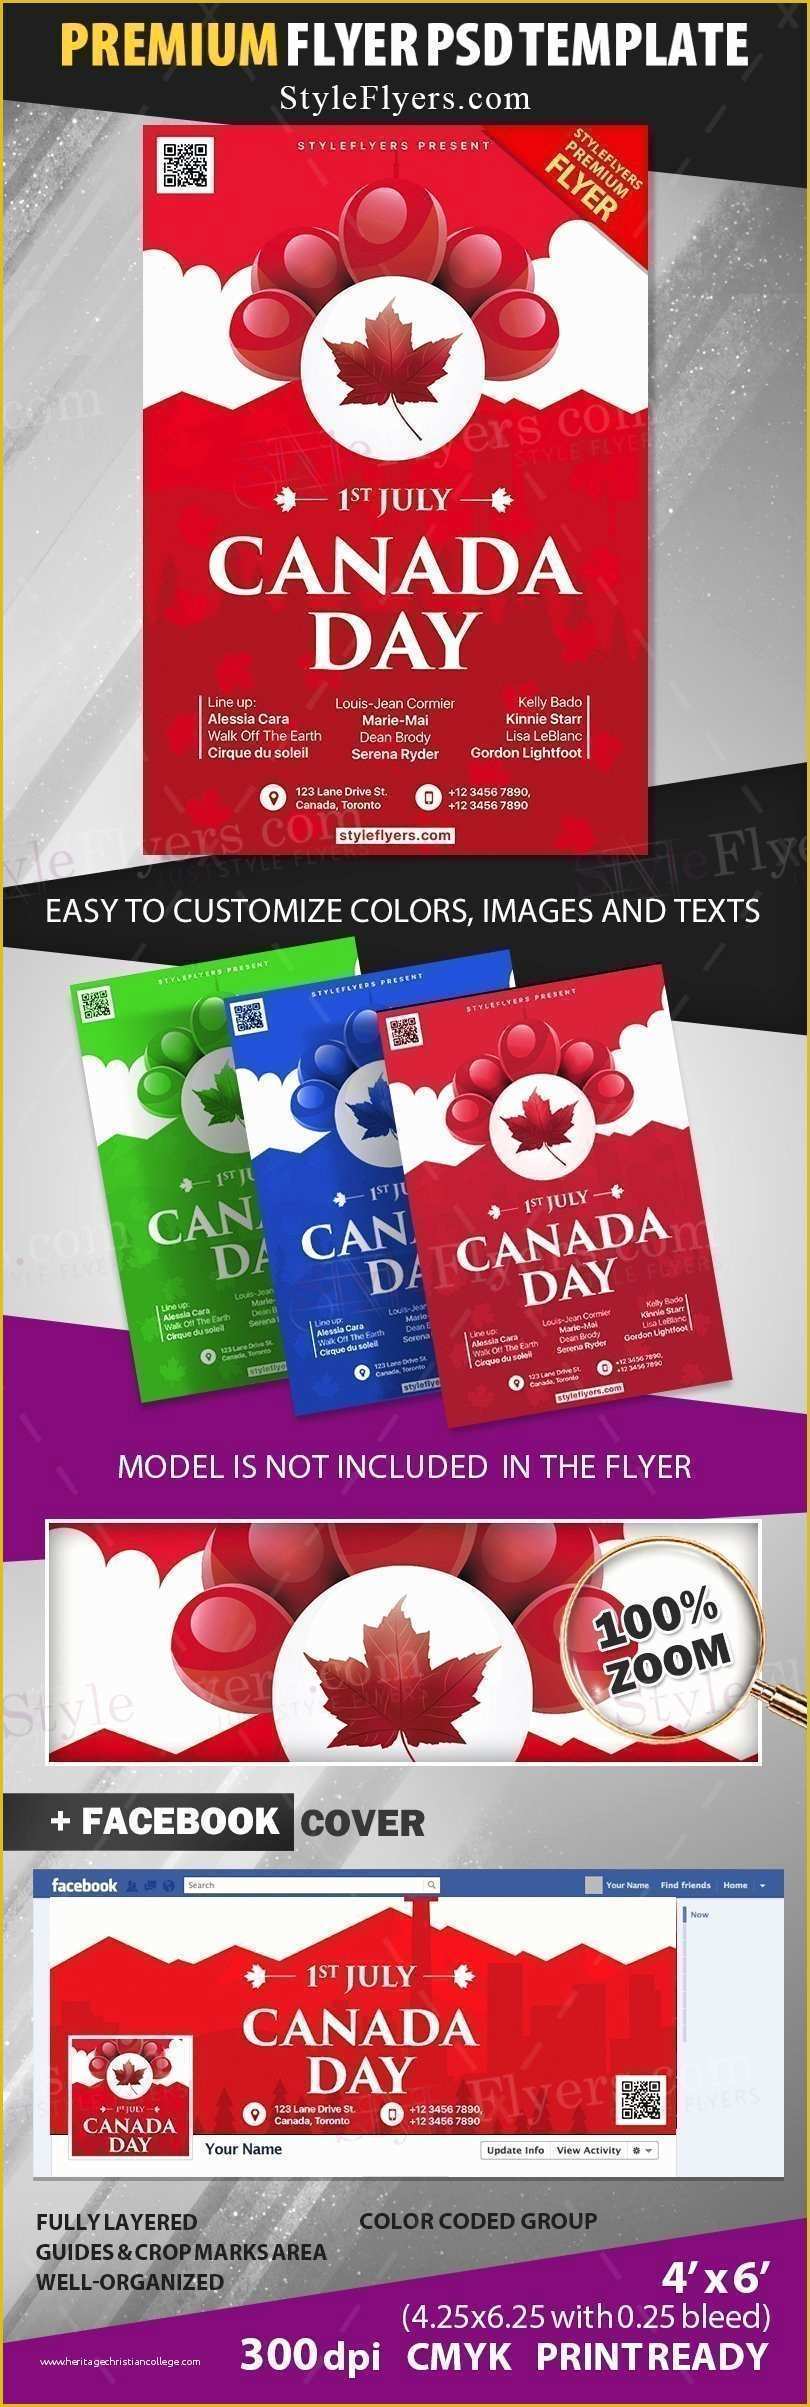 Canada Day Flyer Template Free Of Canada Day Psd Flyer Template Styleflyers